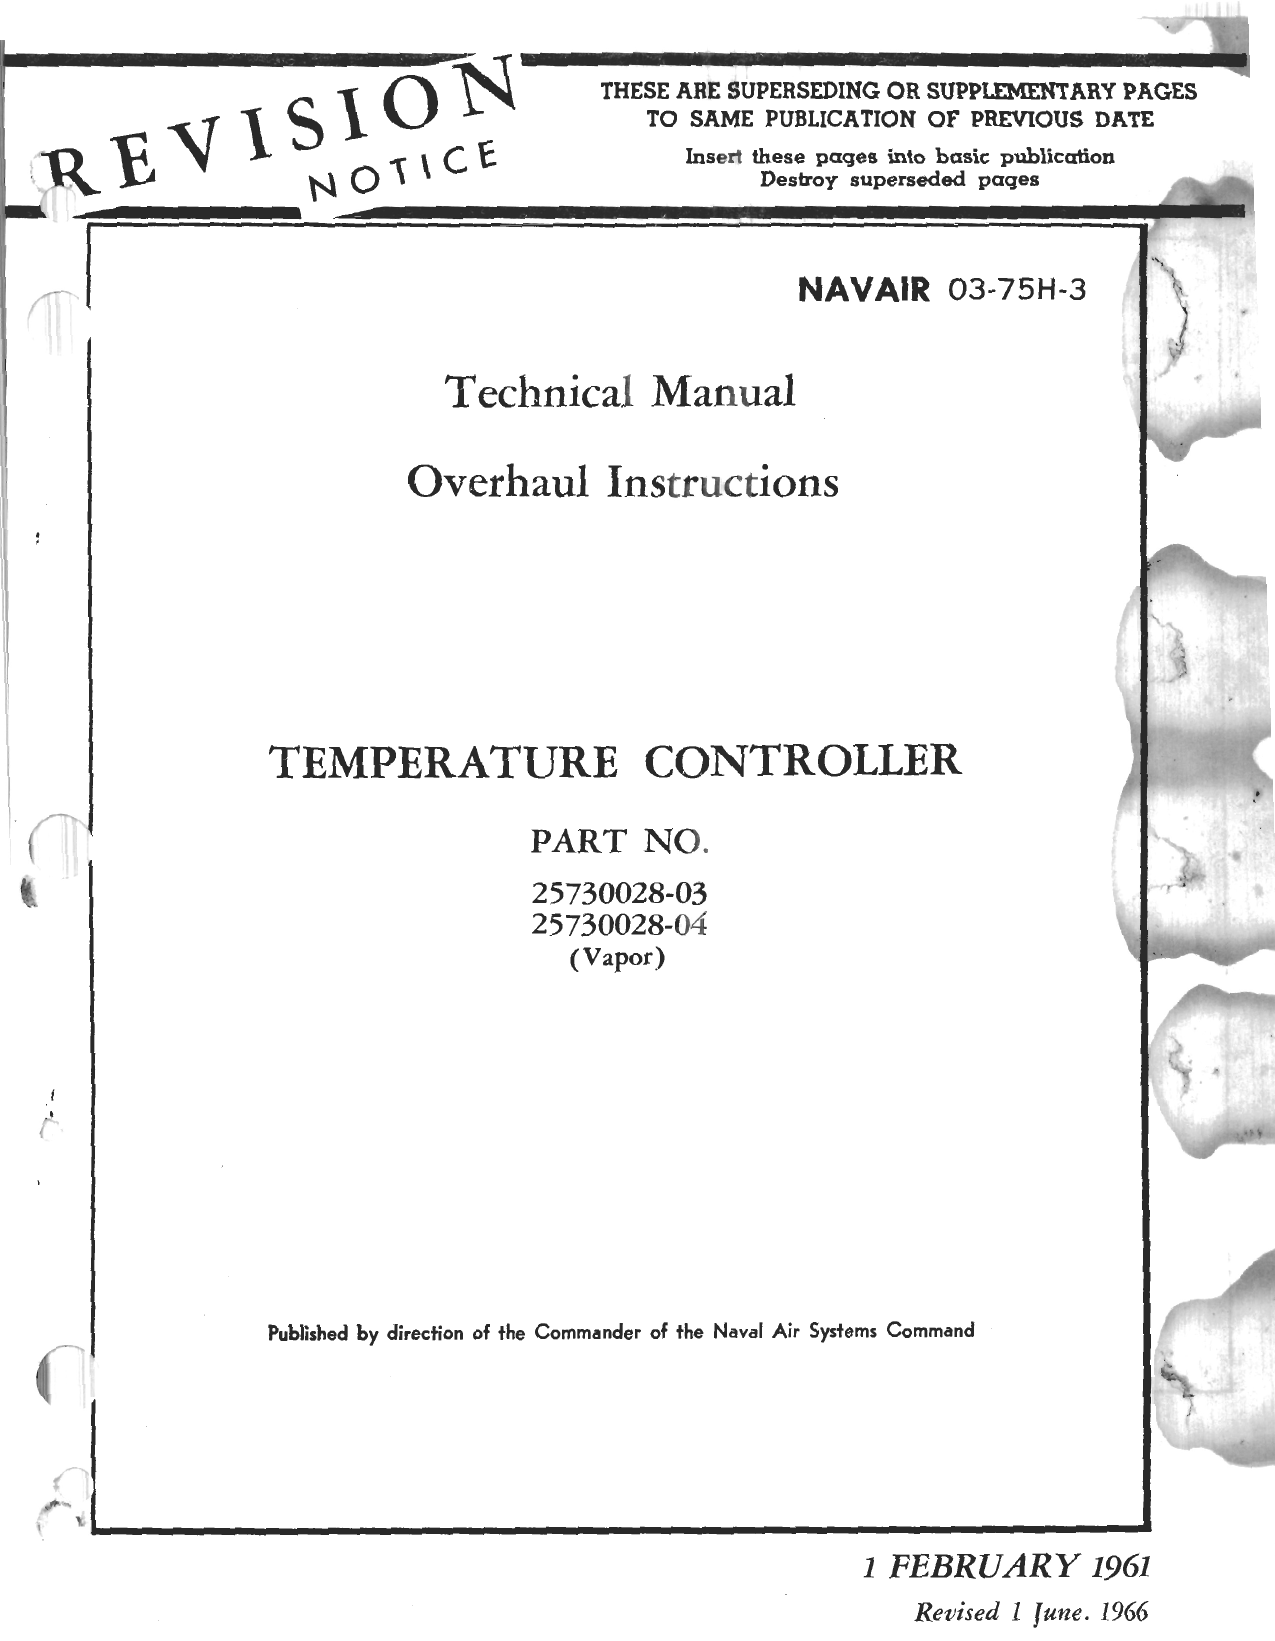 Sample page 1 from AirCorps Library document: Overhaul Instructions for Temperature Controller - Parts 25730028-03 and 25730028-04 